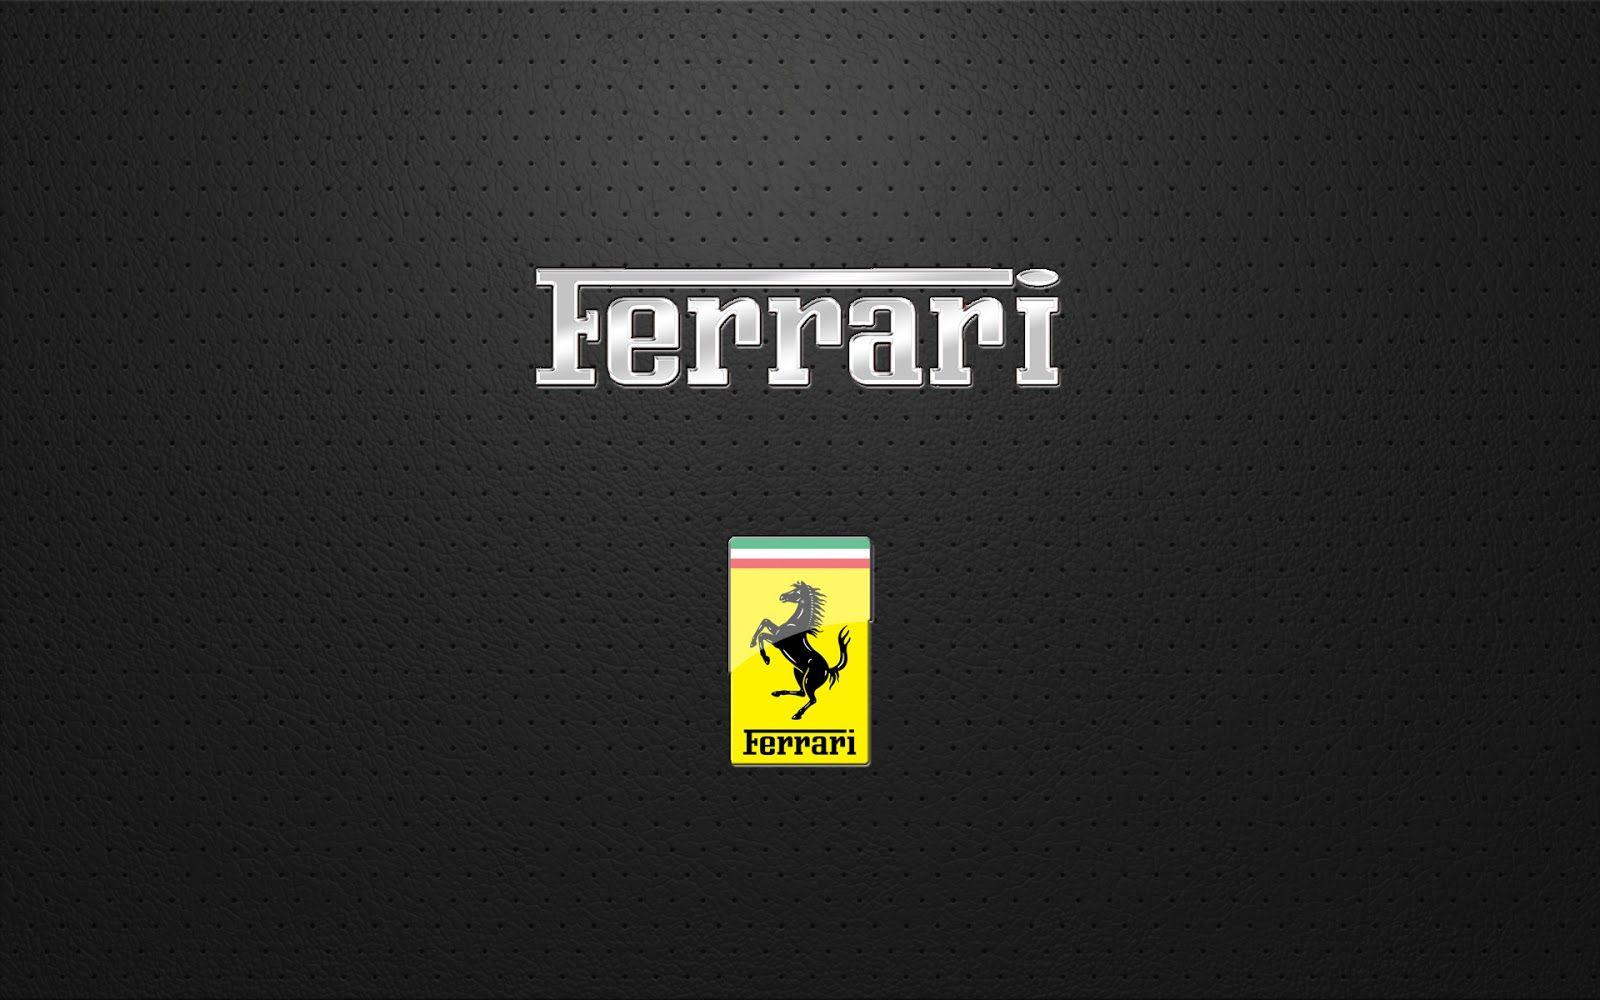 Ferrari Logo - Ferrari Logo, Ferrari Car Symbol Meaning and History | Car Brand ...